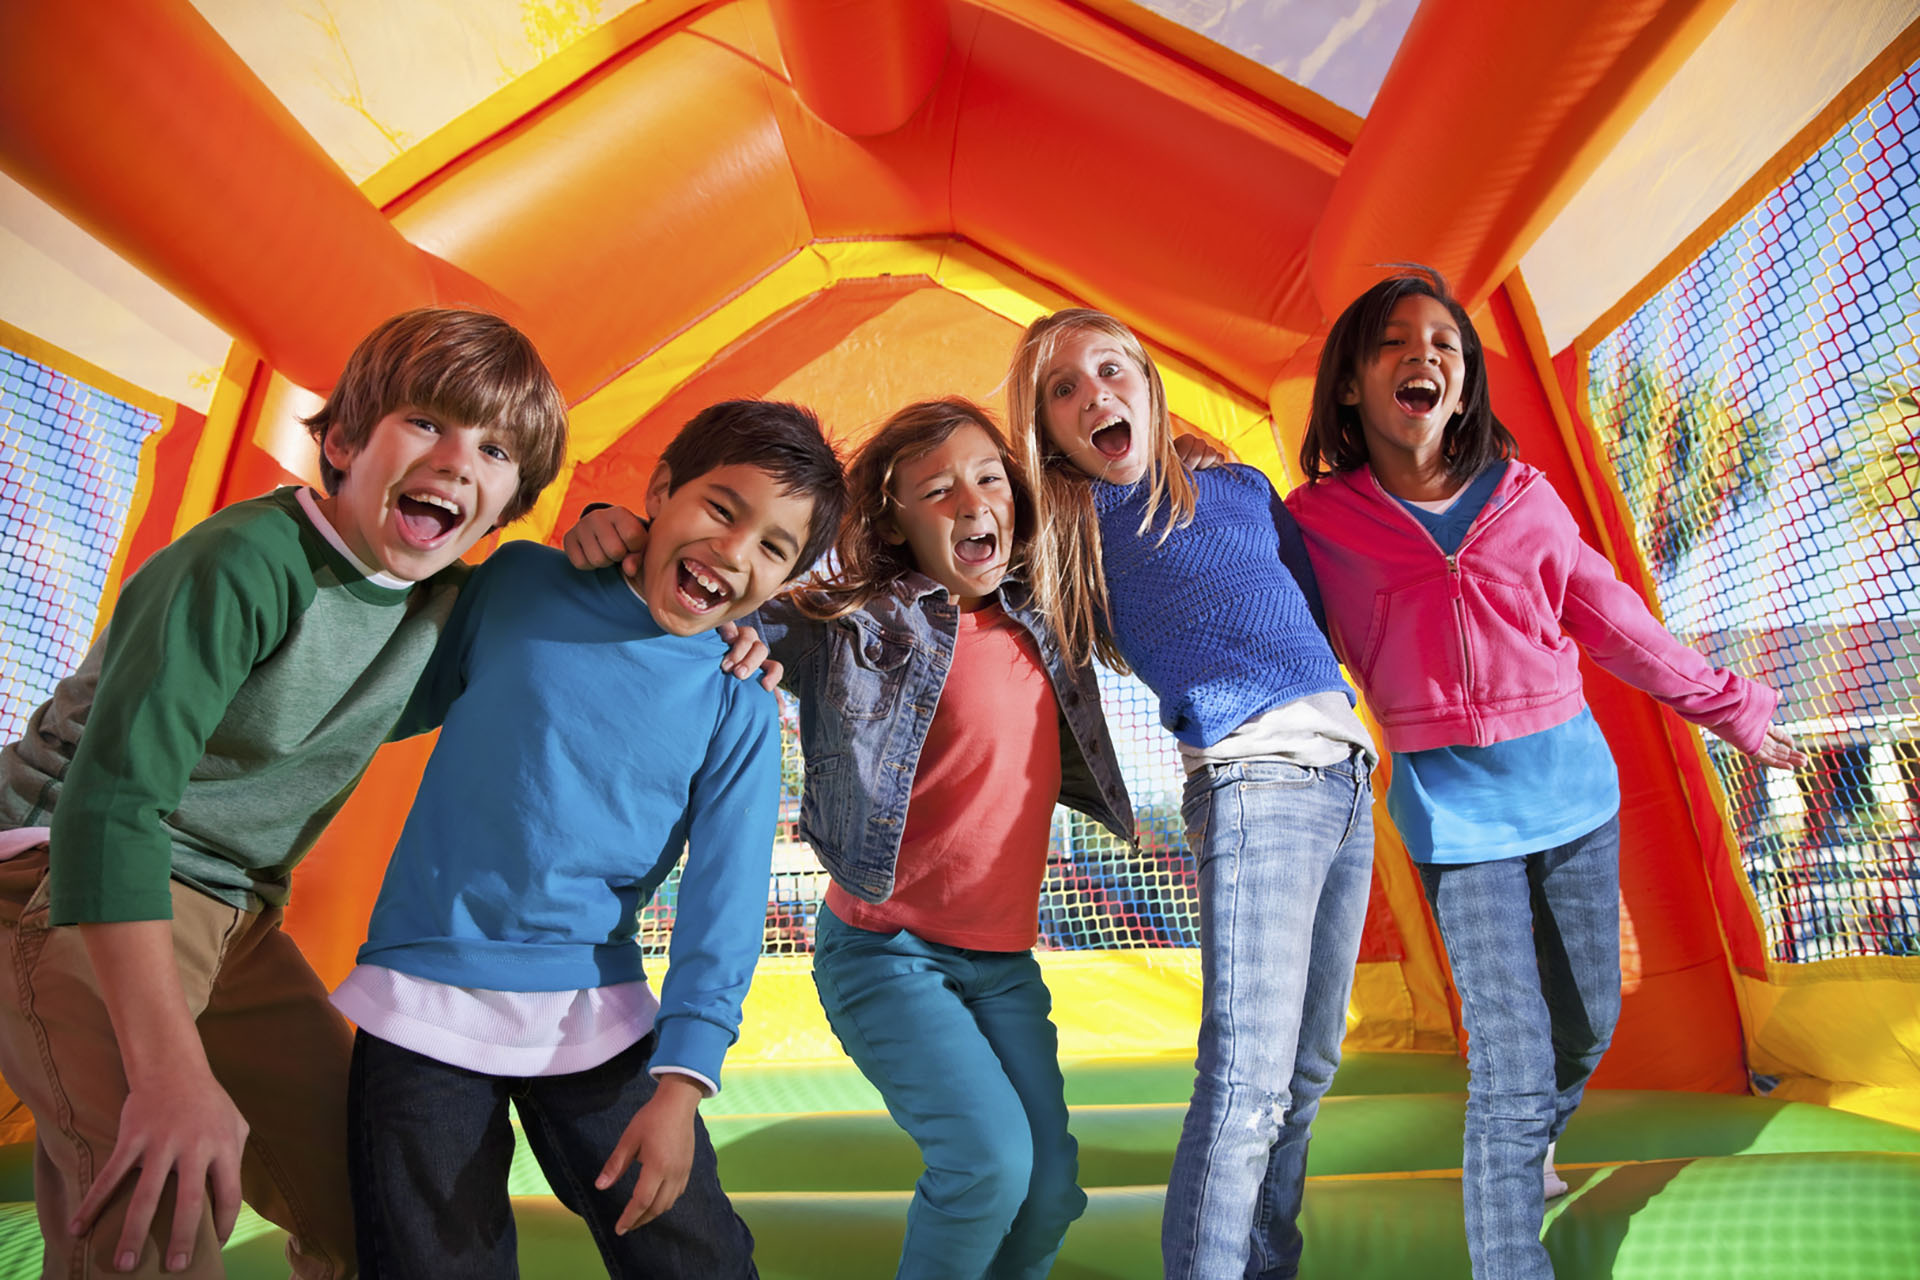 Multi-ethnic group of excited children (ages 7 to 10 years) in inflatable bouncy castle.